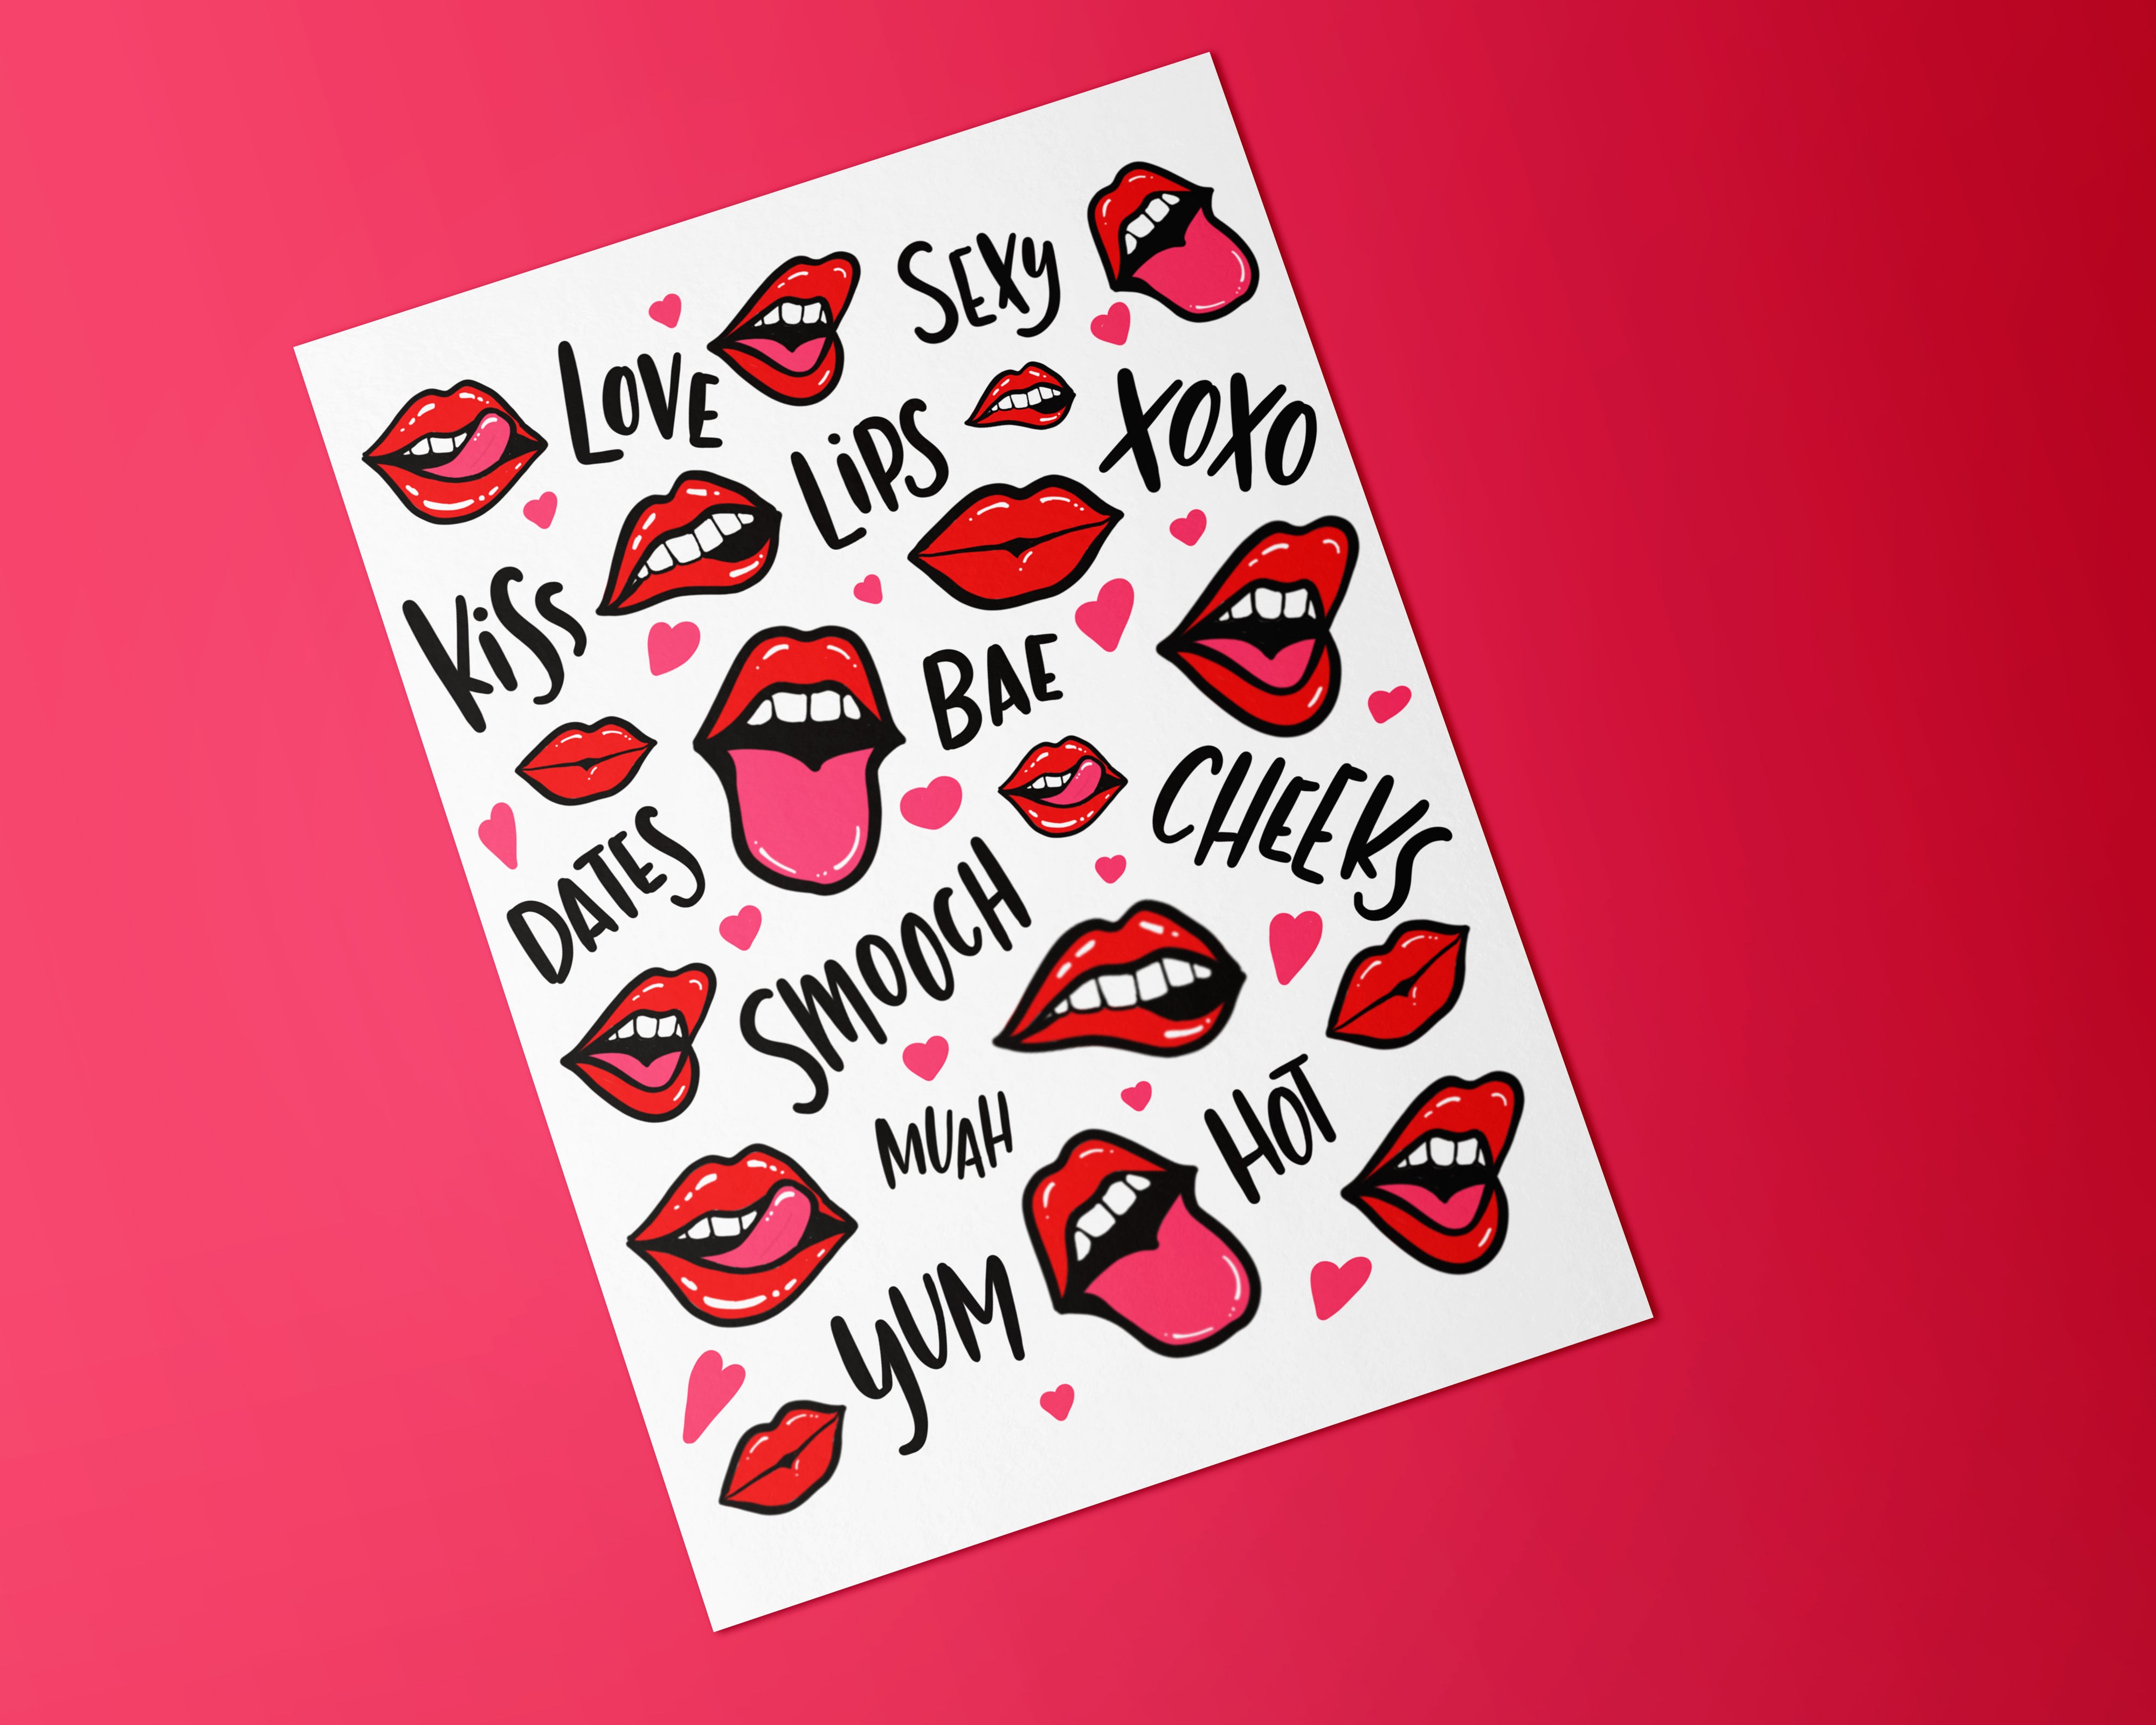 Show Bae You Care This Valentine’s Day With These Cheeky Greeting Cards
